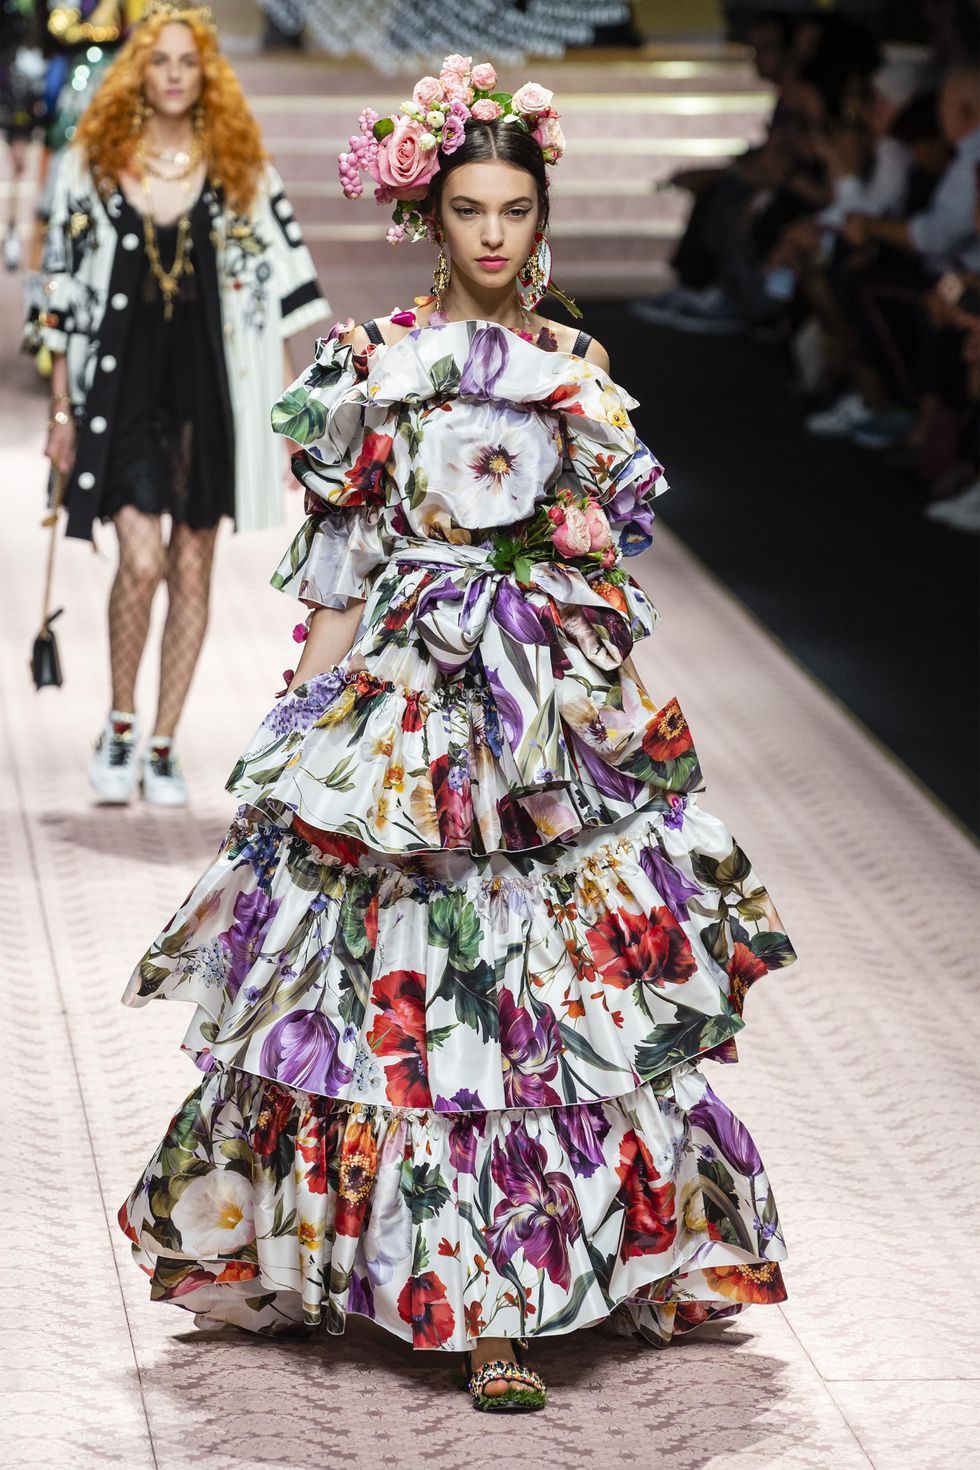 Spring 2019 Ready-to-Wear Fashion shows